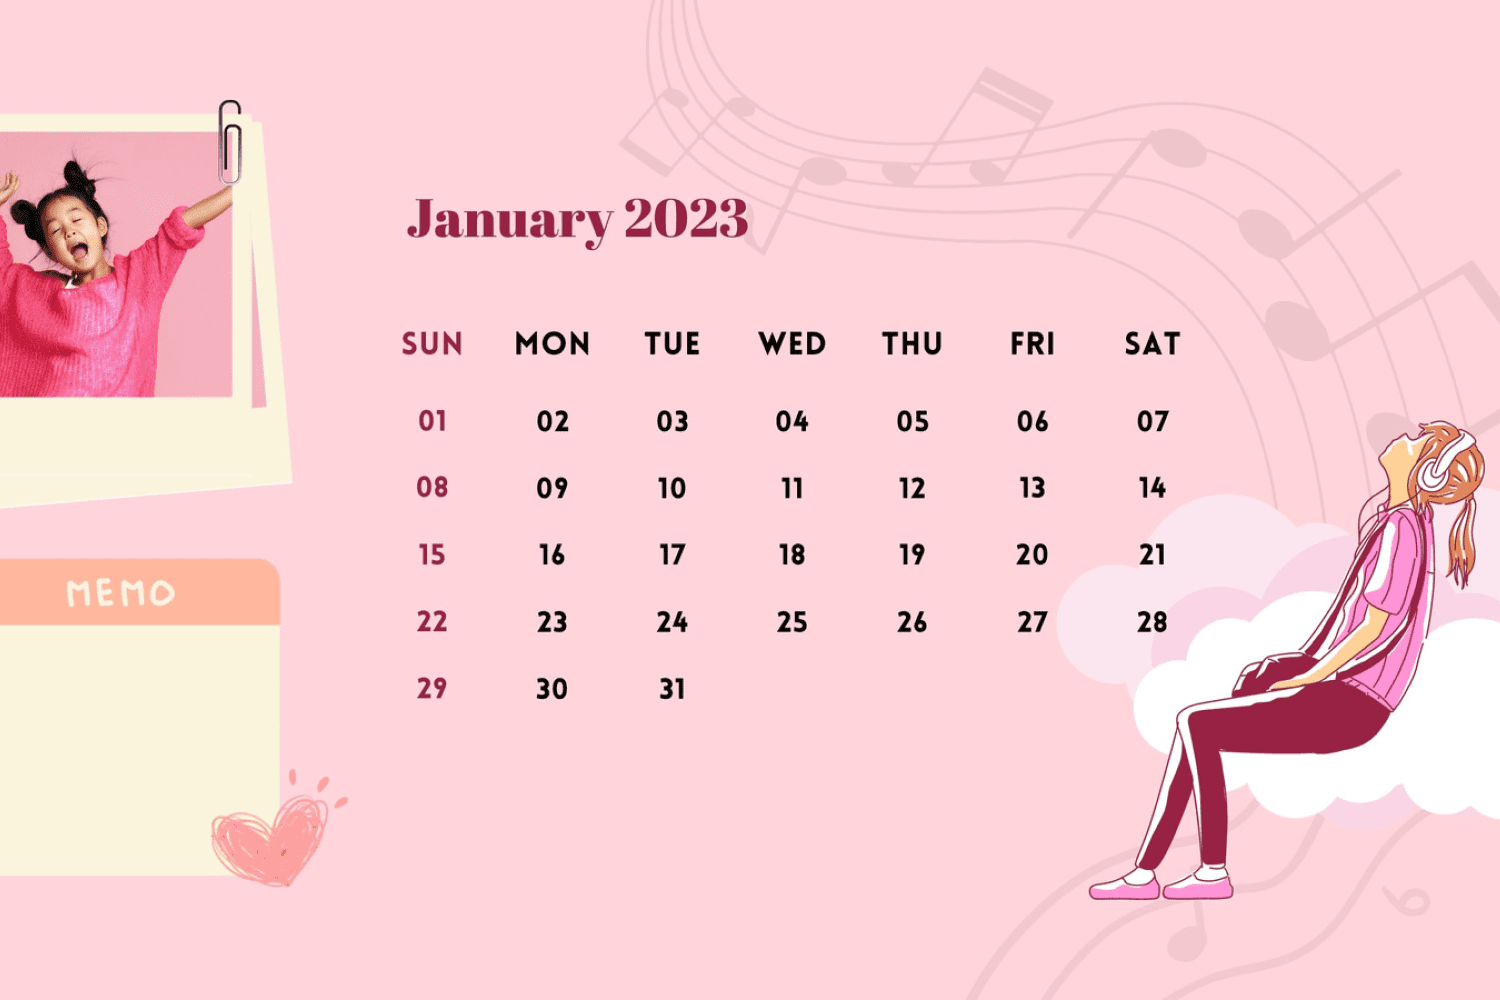 Calendar with pink and purple color palette and drawn girl and clouds.